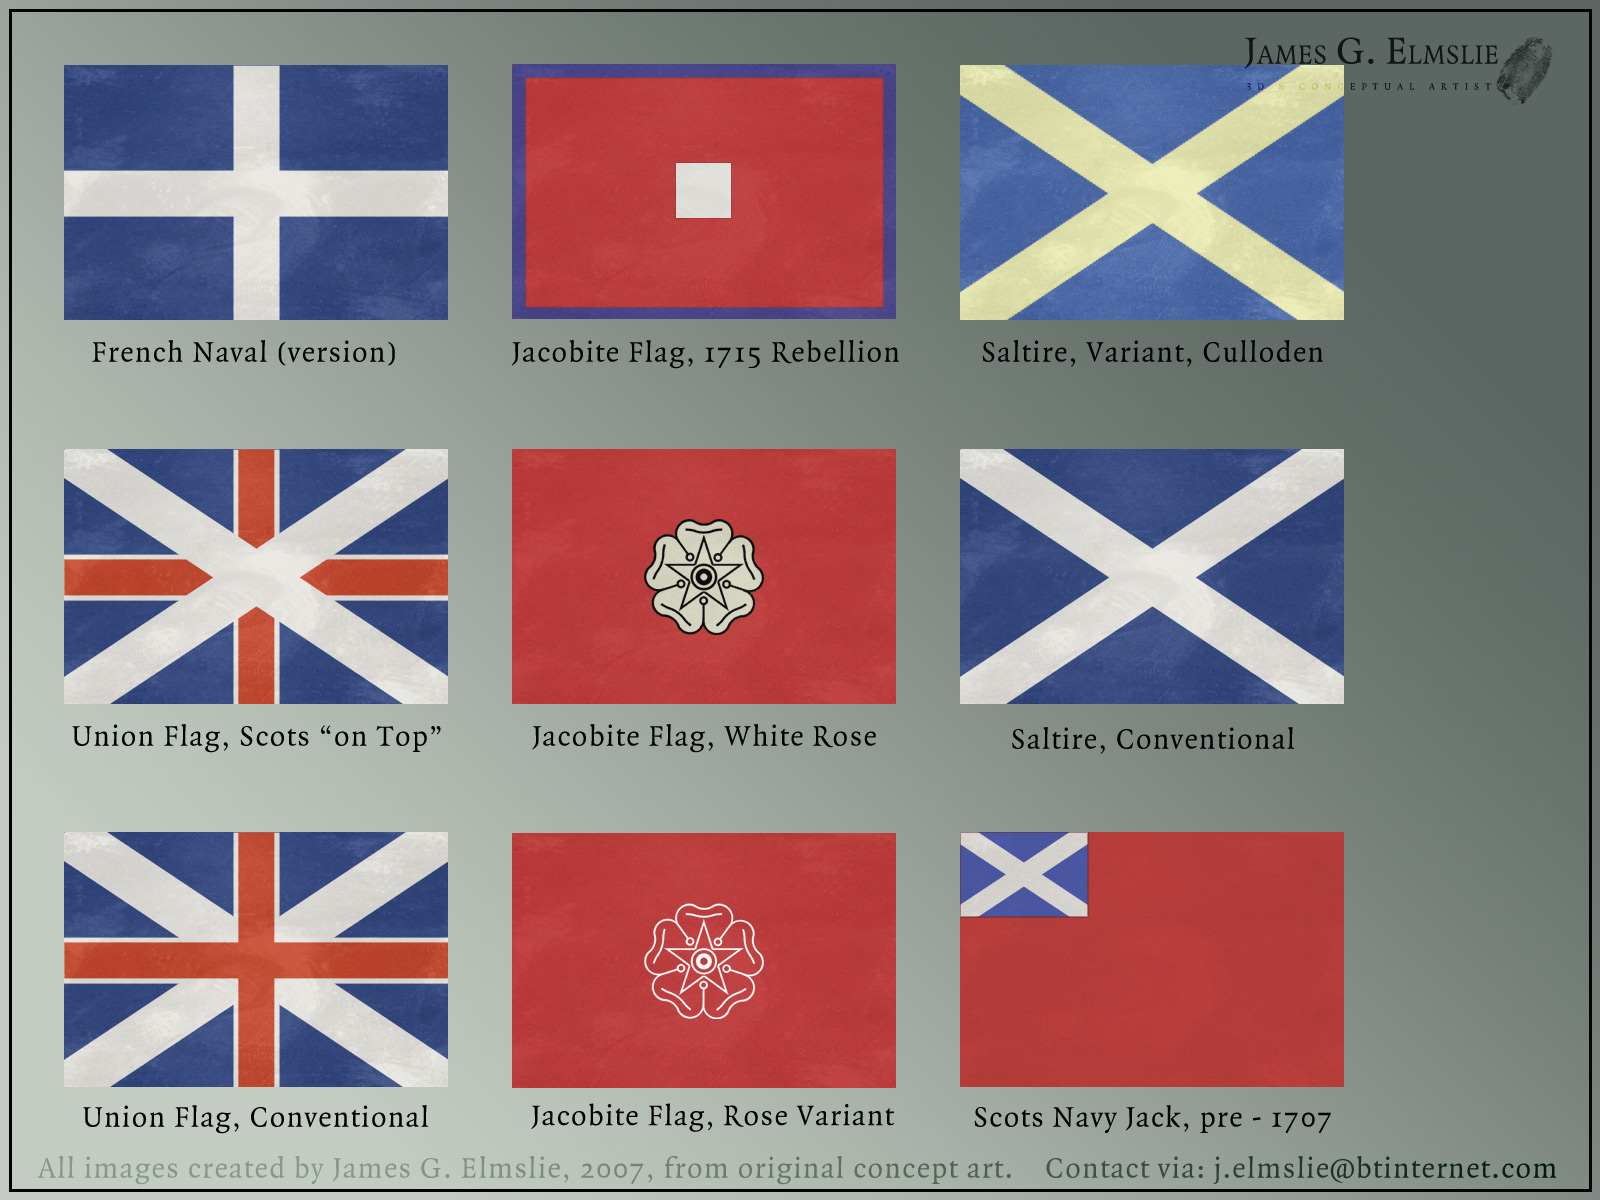  his work on ideas for flags and designs for the Highland Confederacy.